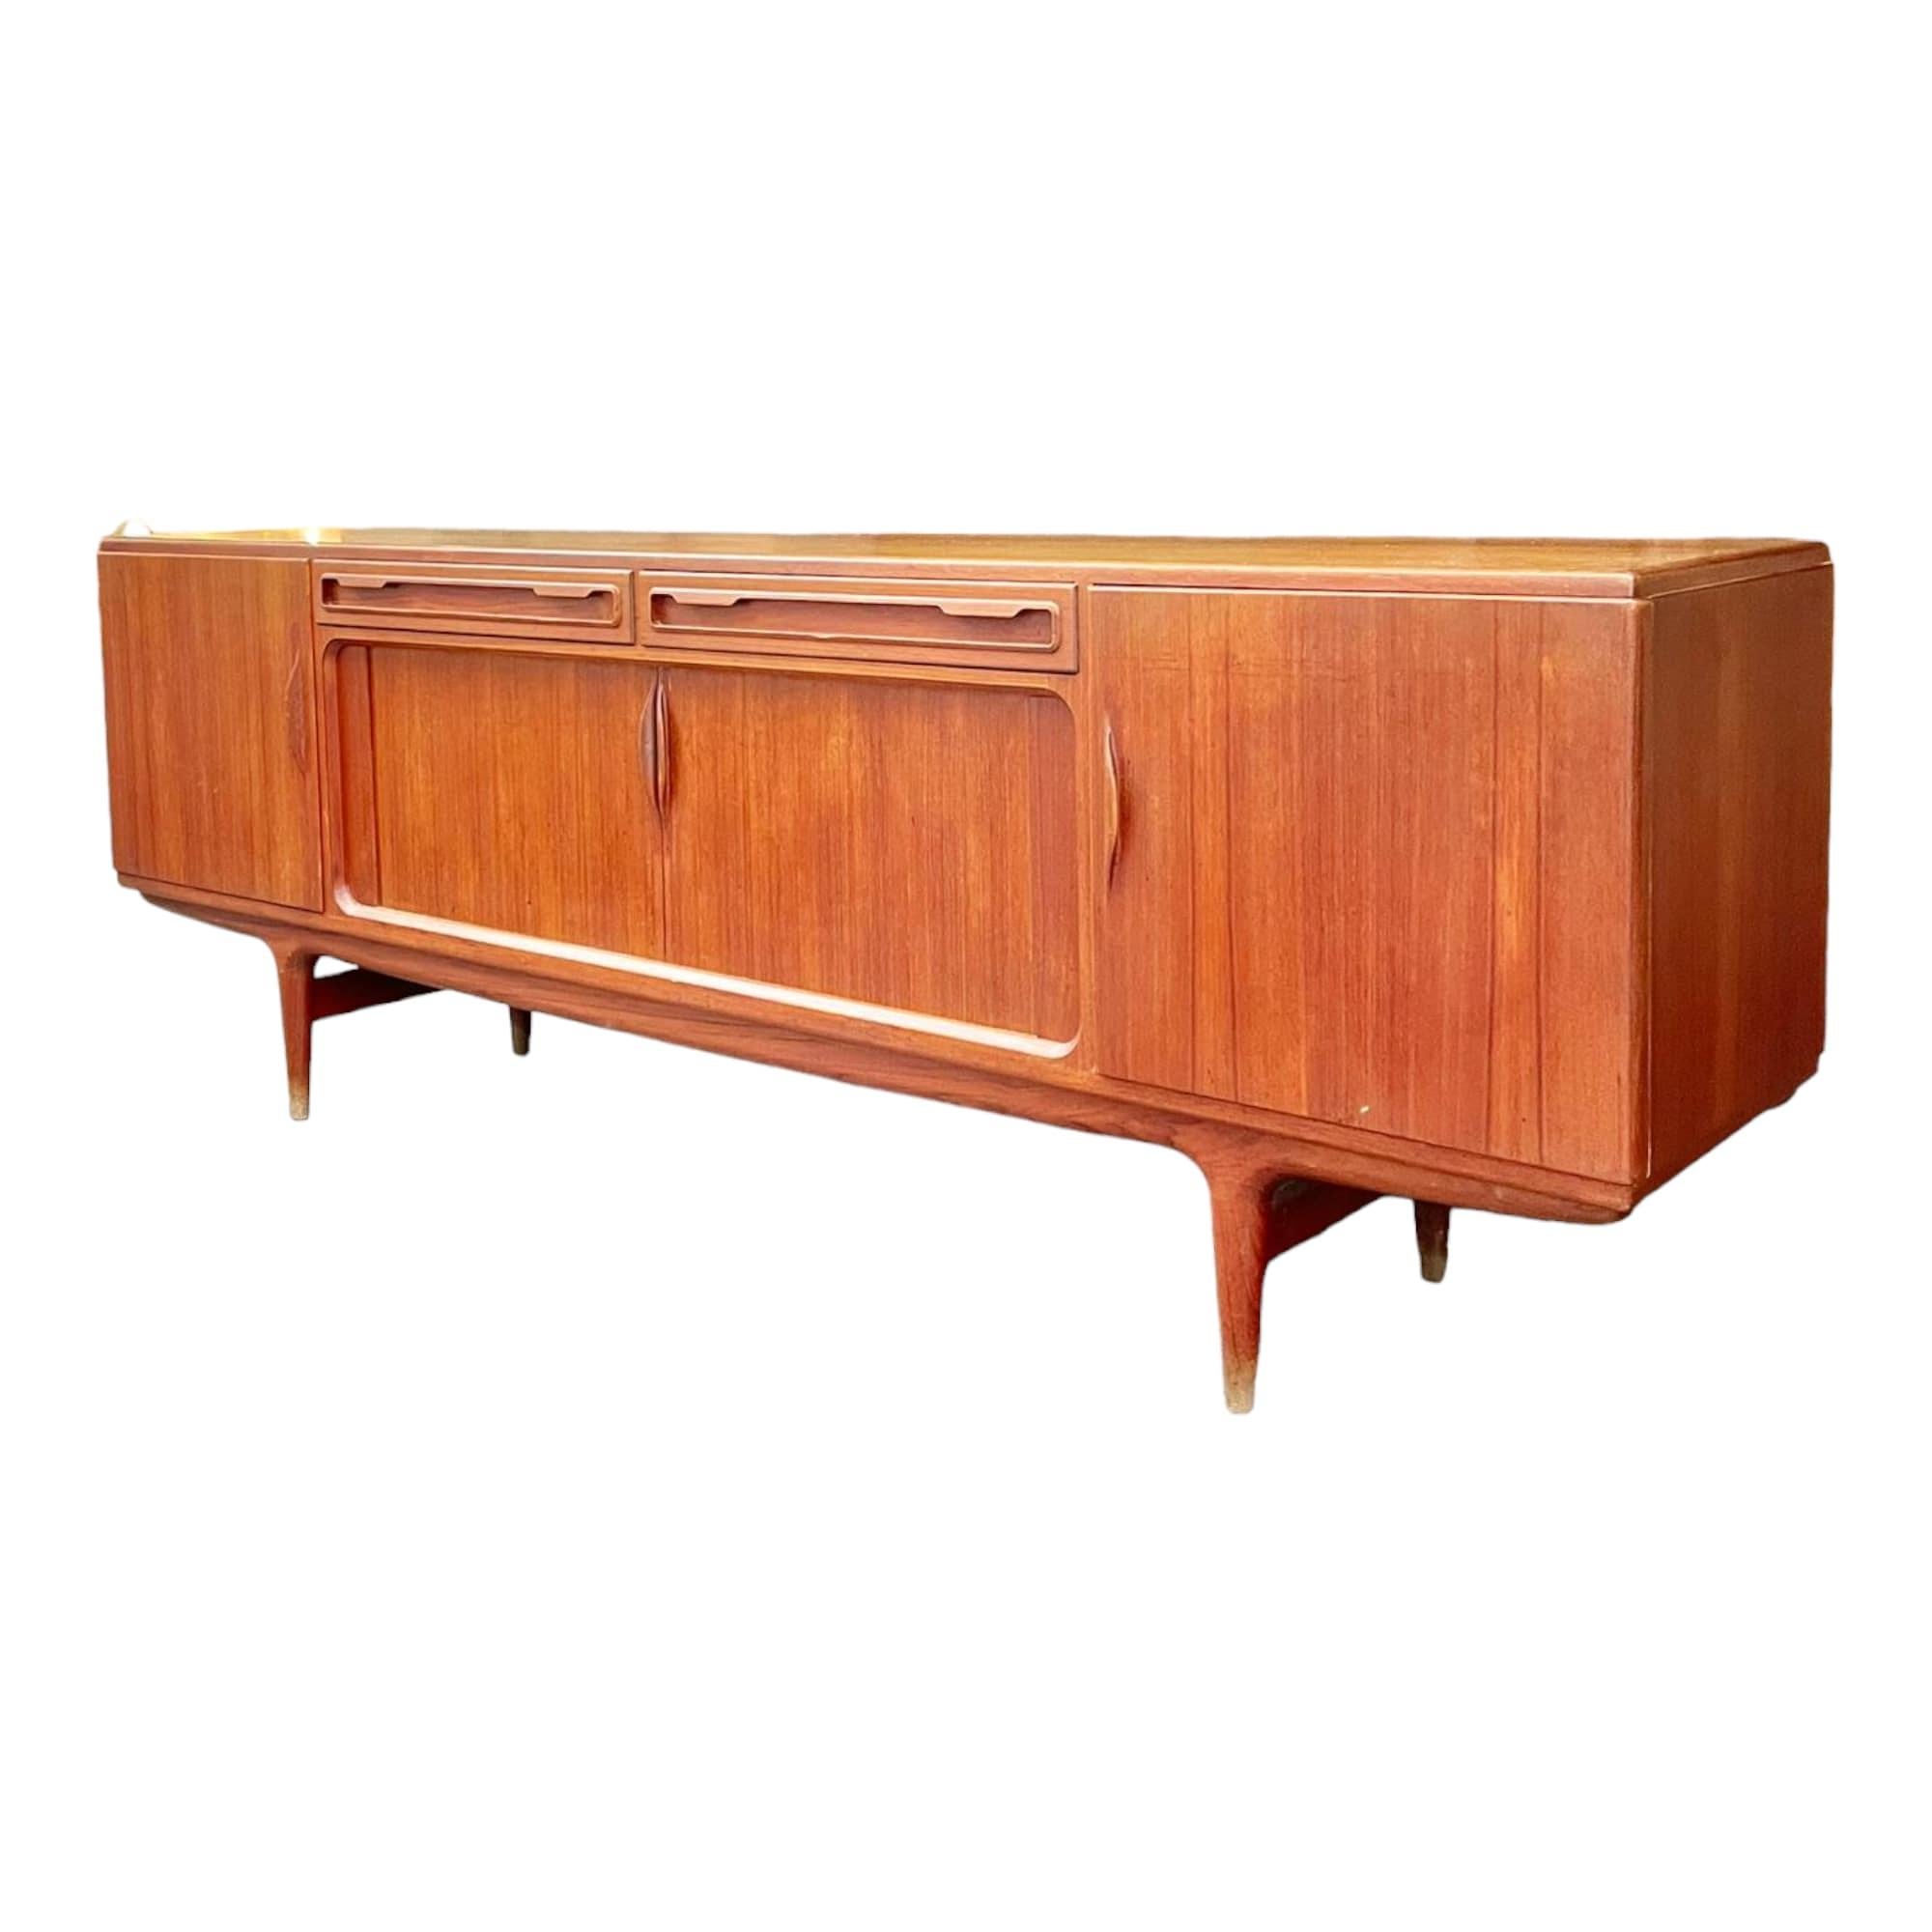 From Denmark. Discover the timeless elegance of Danish design with this stunning 1960s teak sideboard, designed by the famous Johannes Andersen for Møbelfabrik.

Featuring sliding doors and drawers, this piece seamlessly combines functionality and